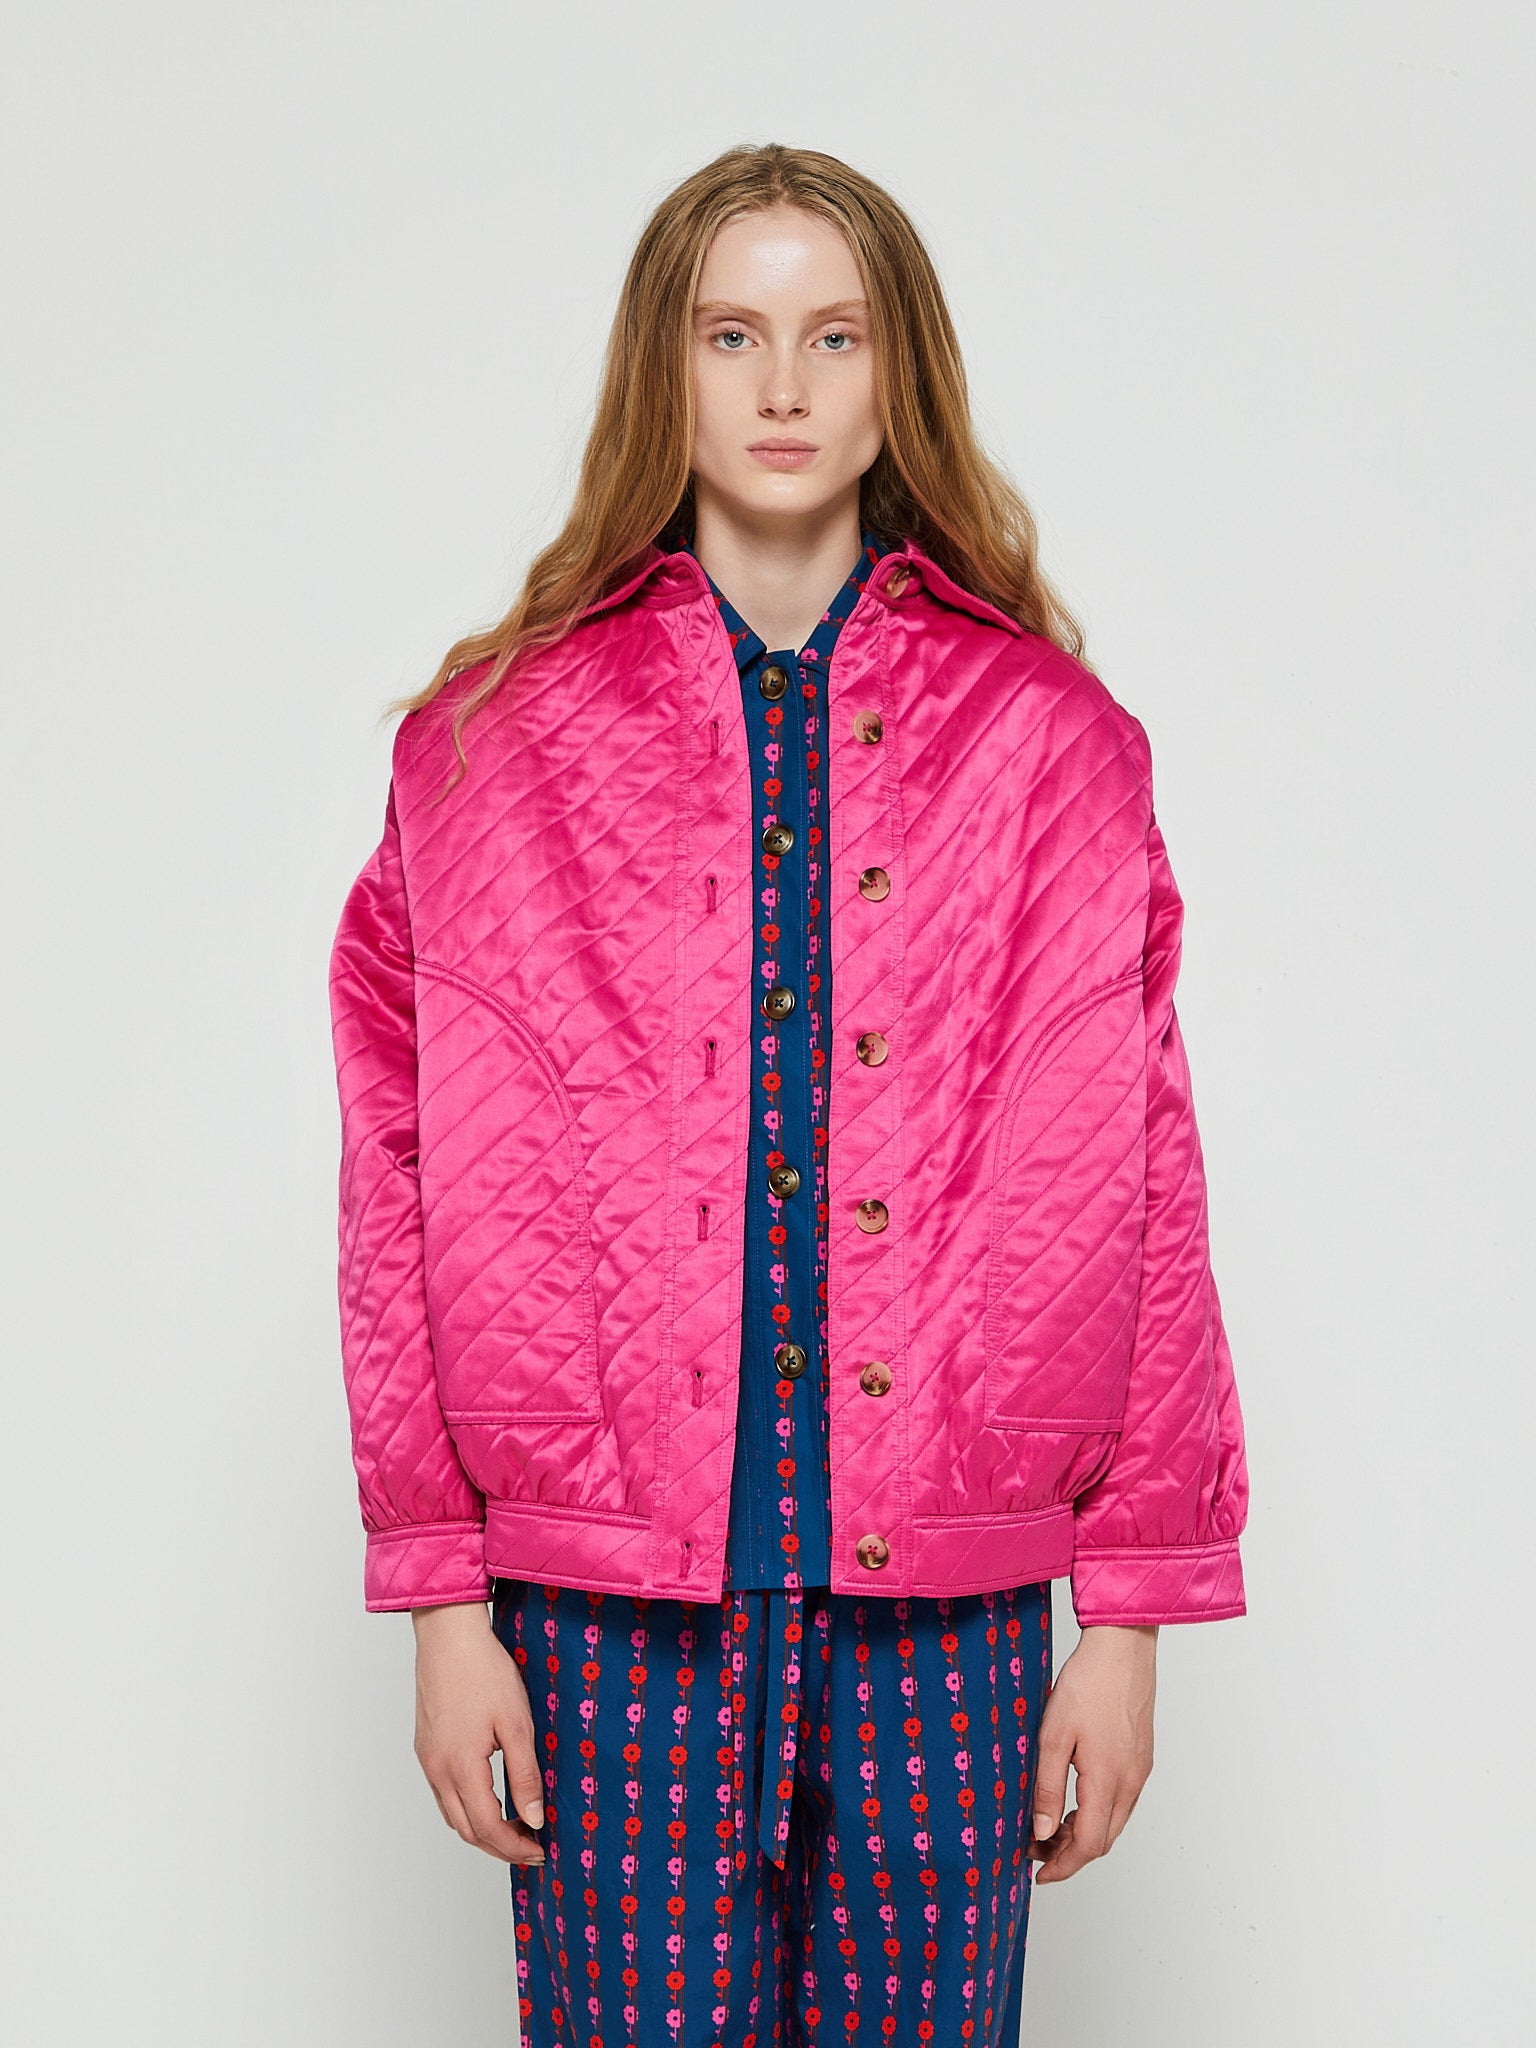 CARO Editions - Mimi Jacket in Hot Pink Duchess